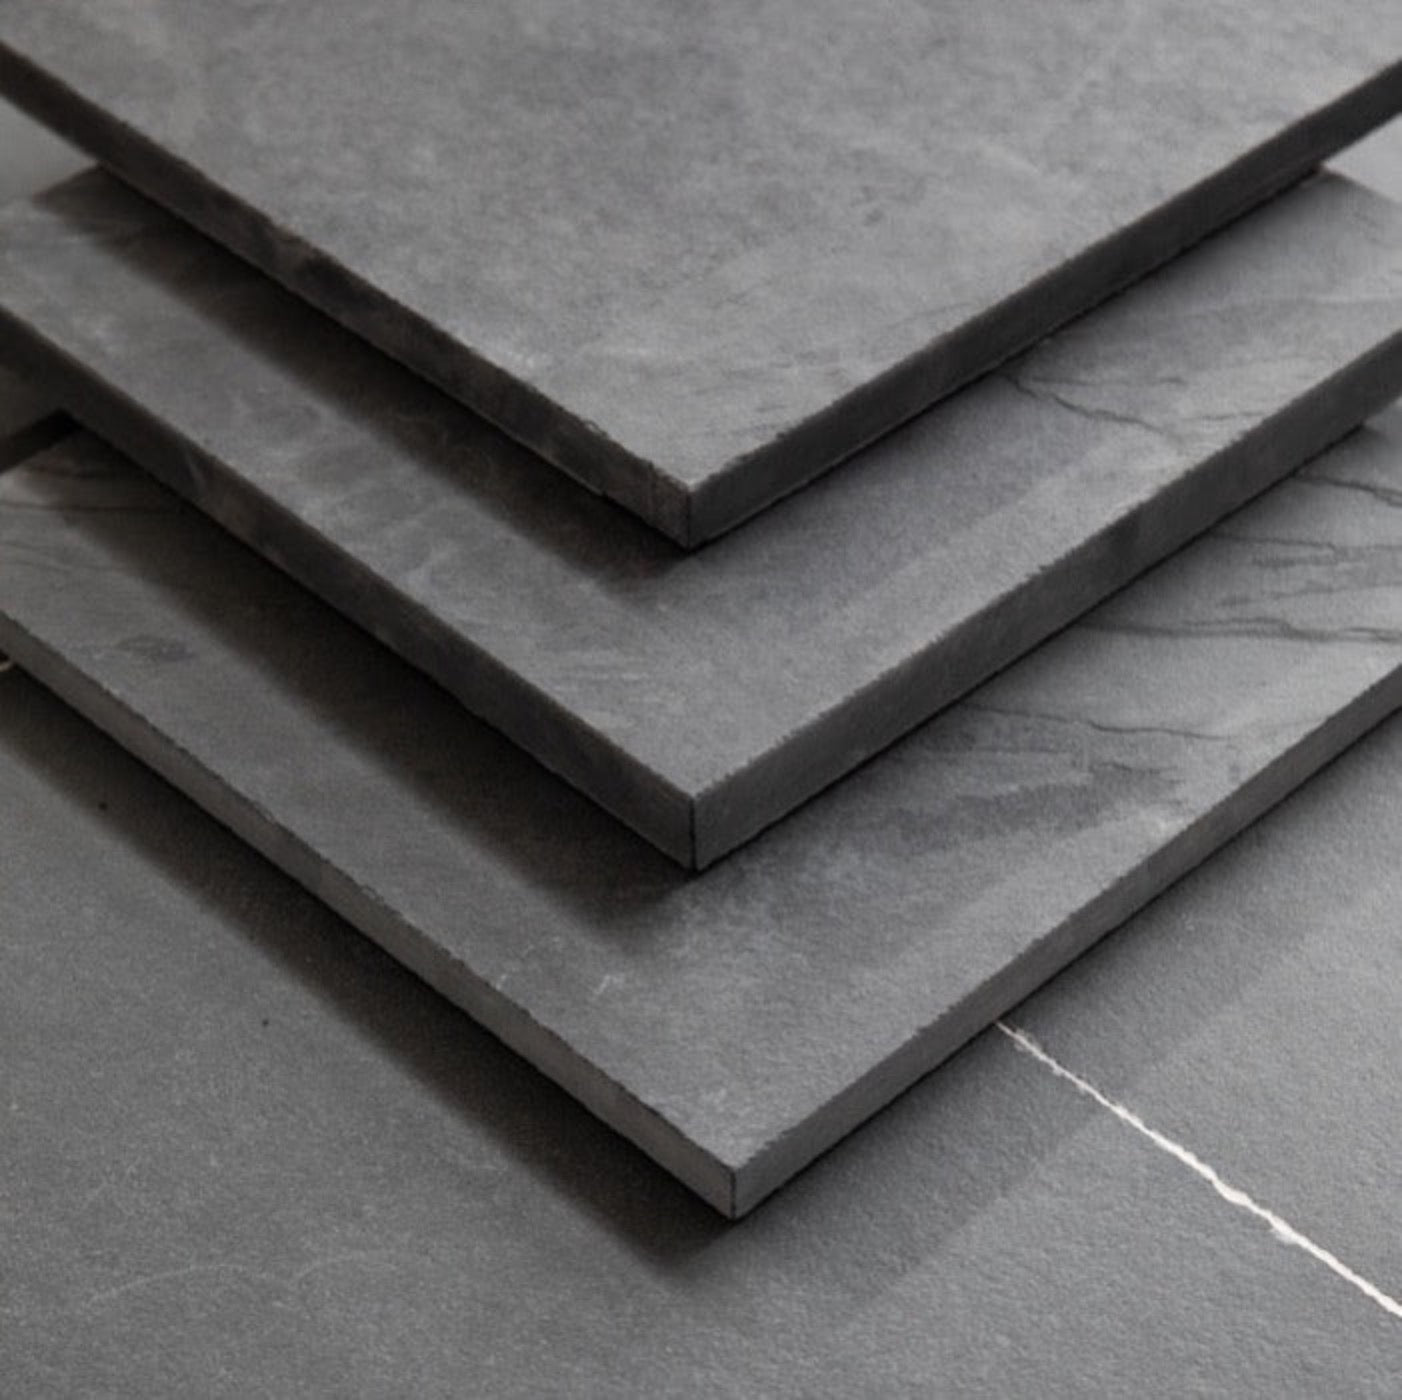 Black Slate Paving Slabs | 600 x 600 x 20 mm | As low as £32.81/m2 | Delivered